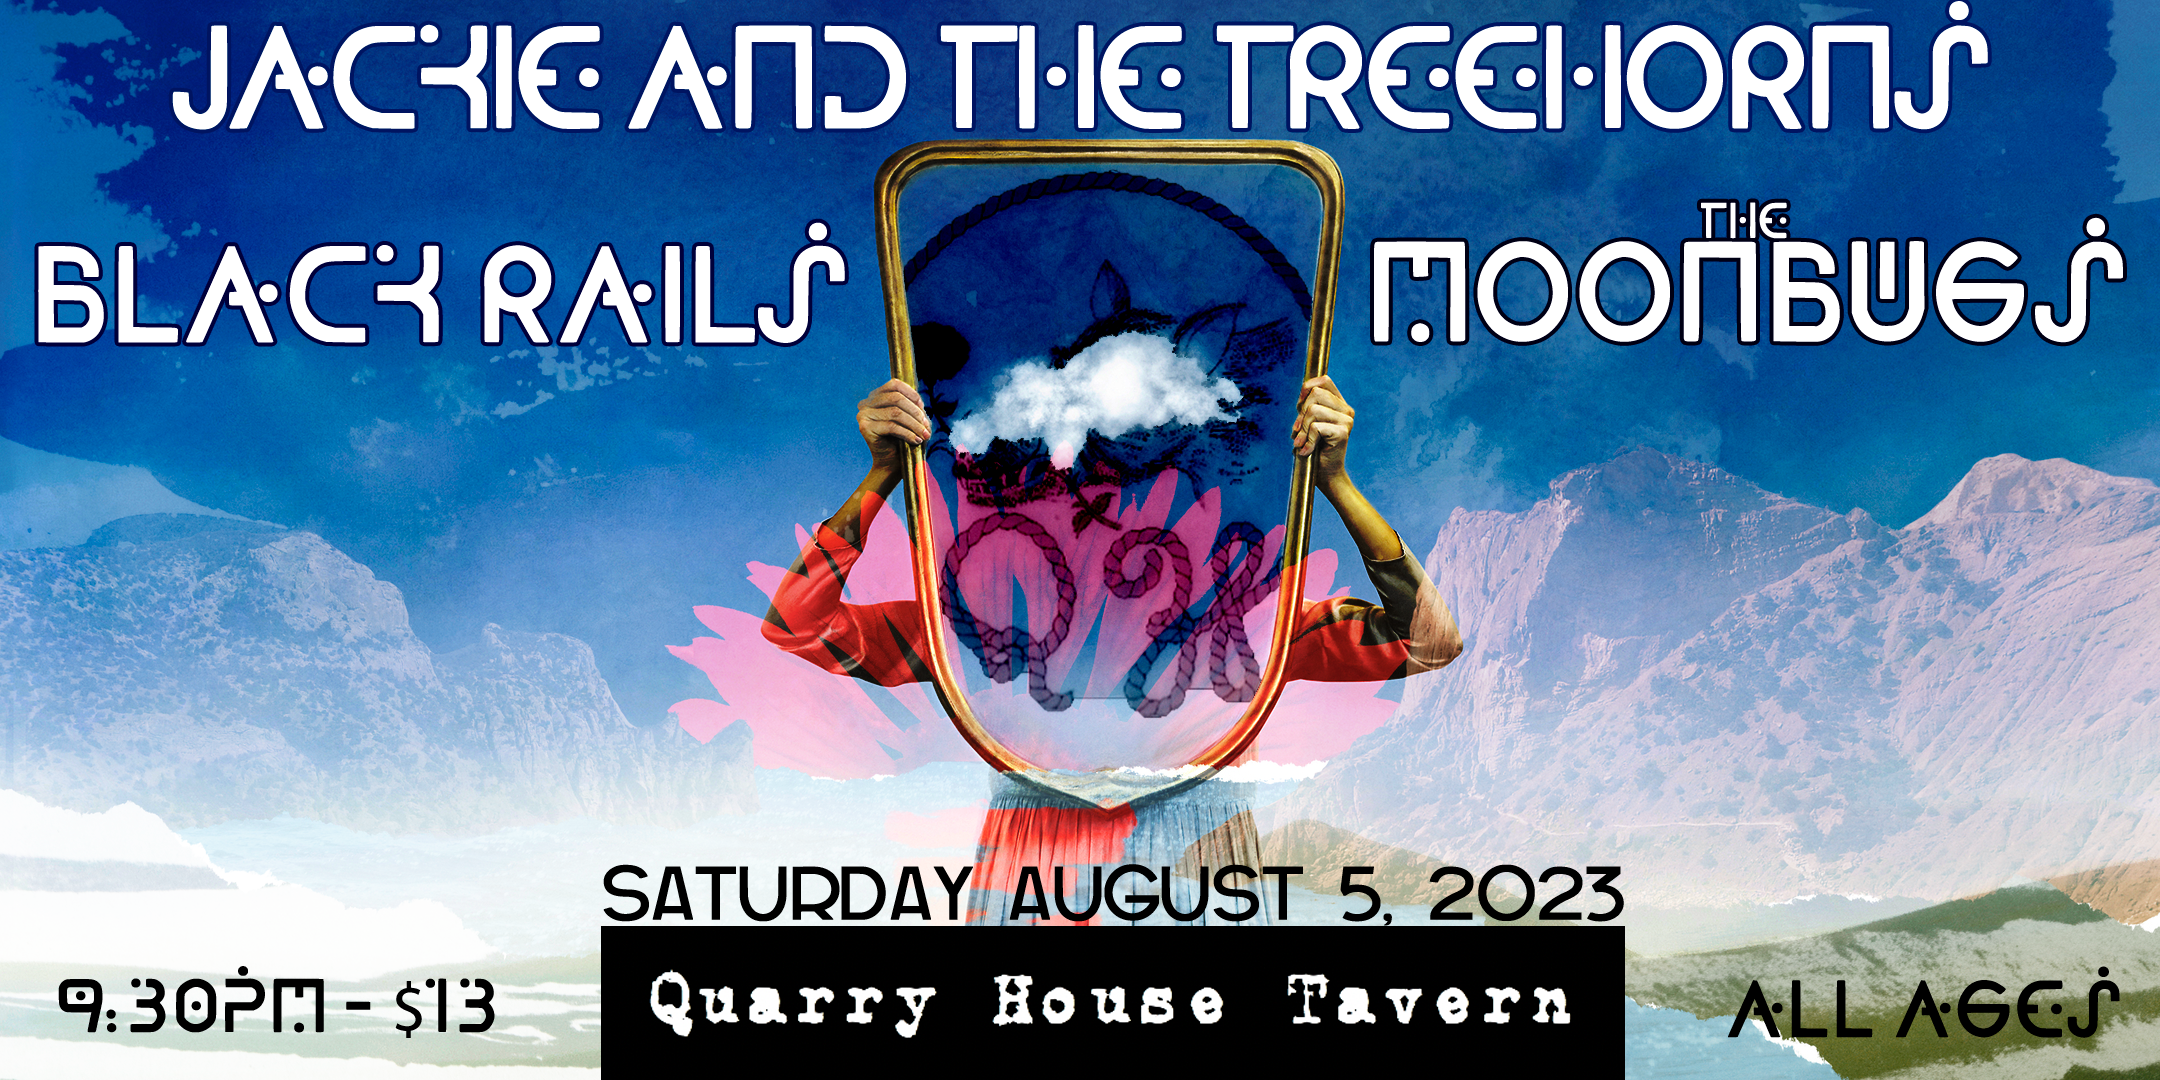 Jackie and The Treehorns @ Quarry House Tavern